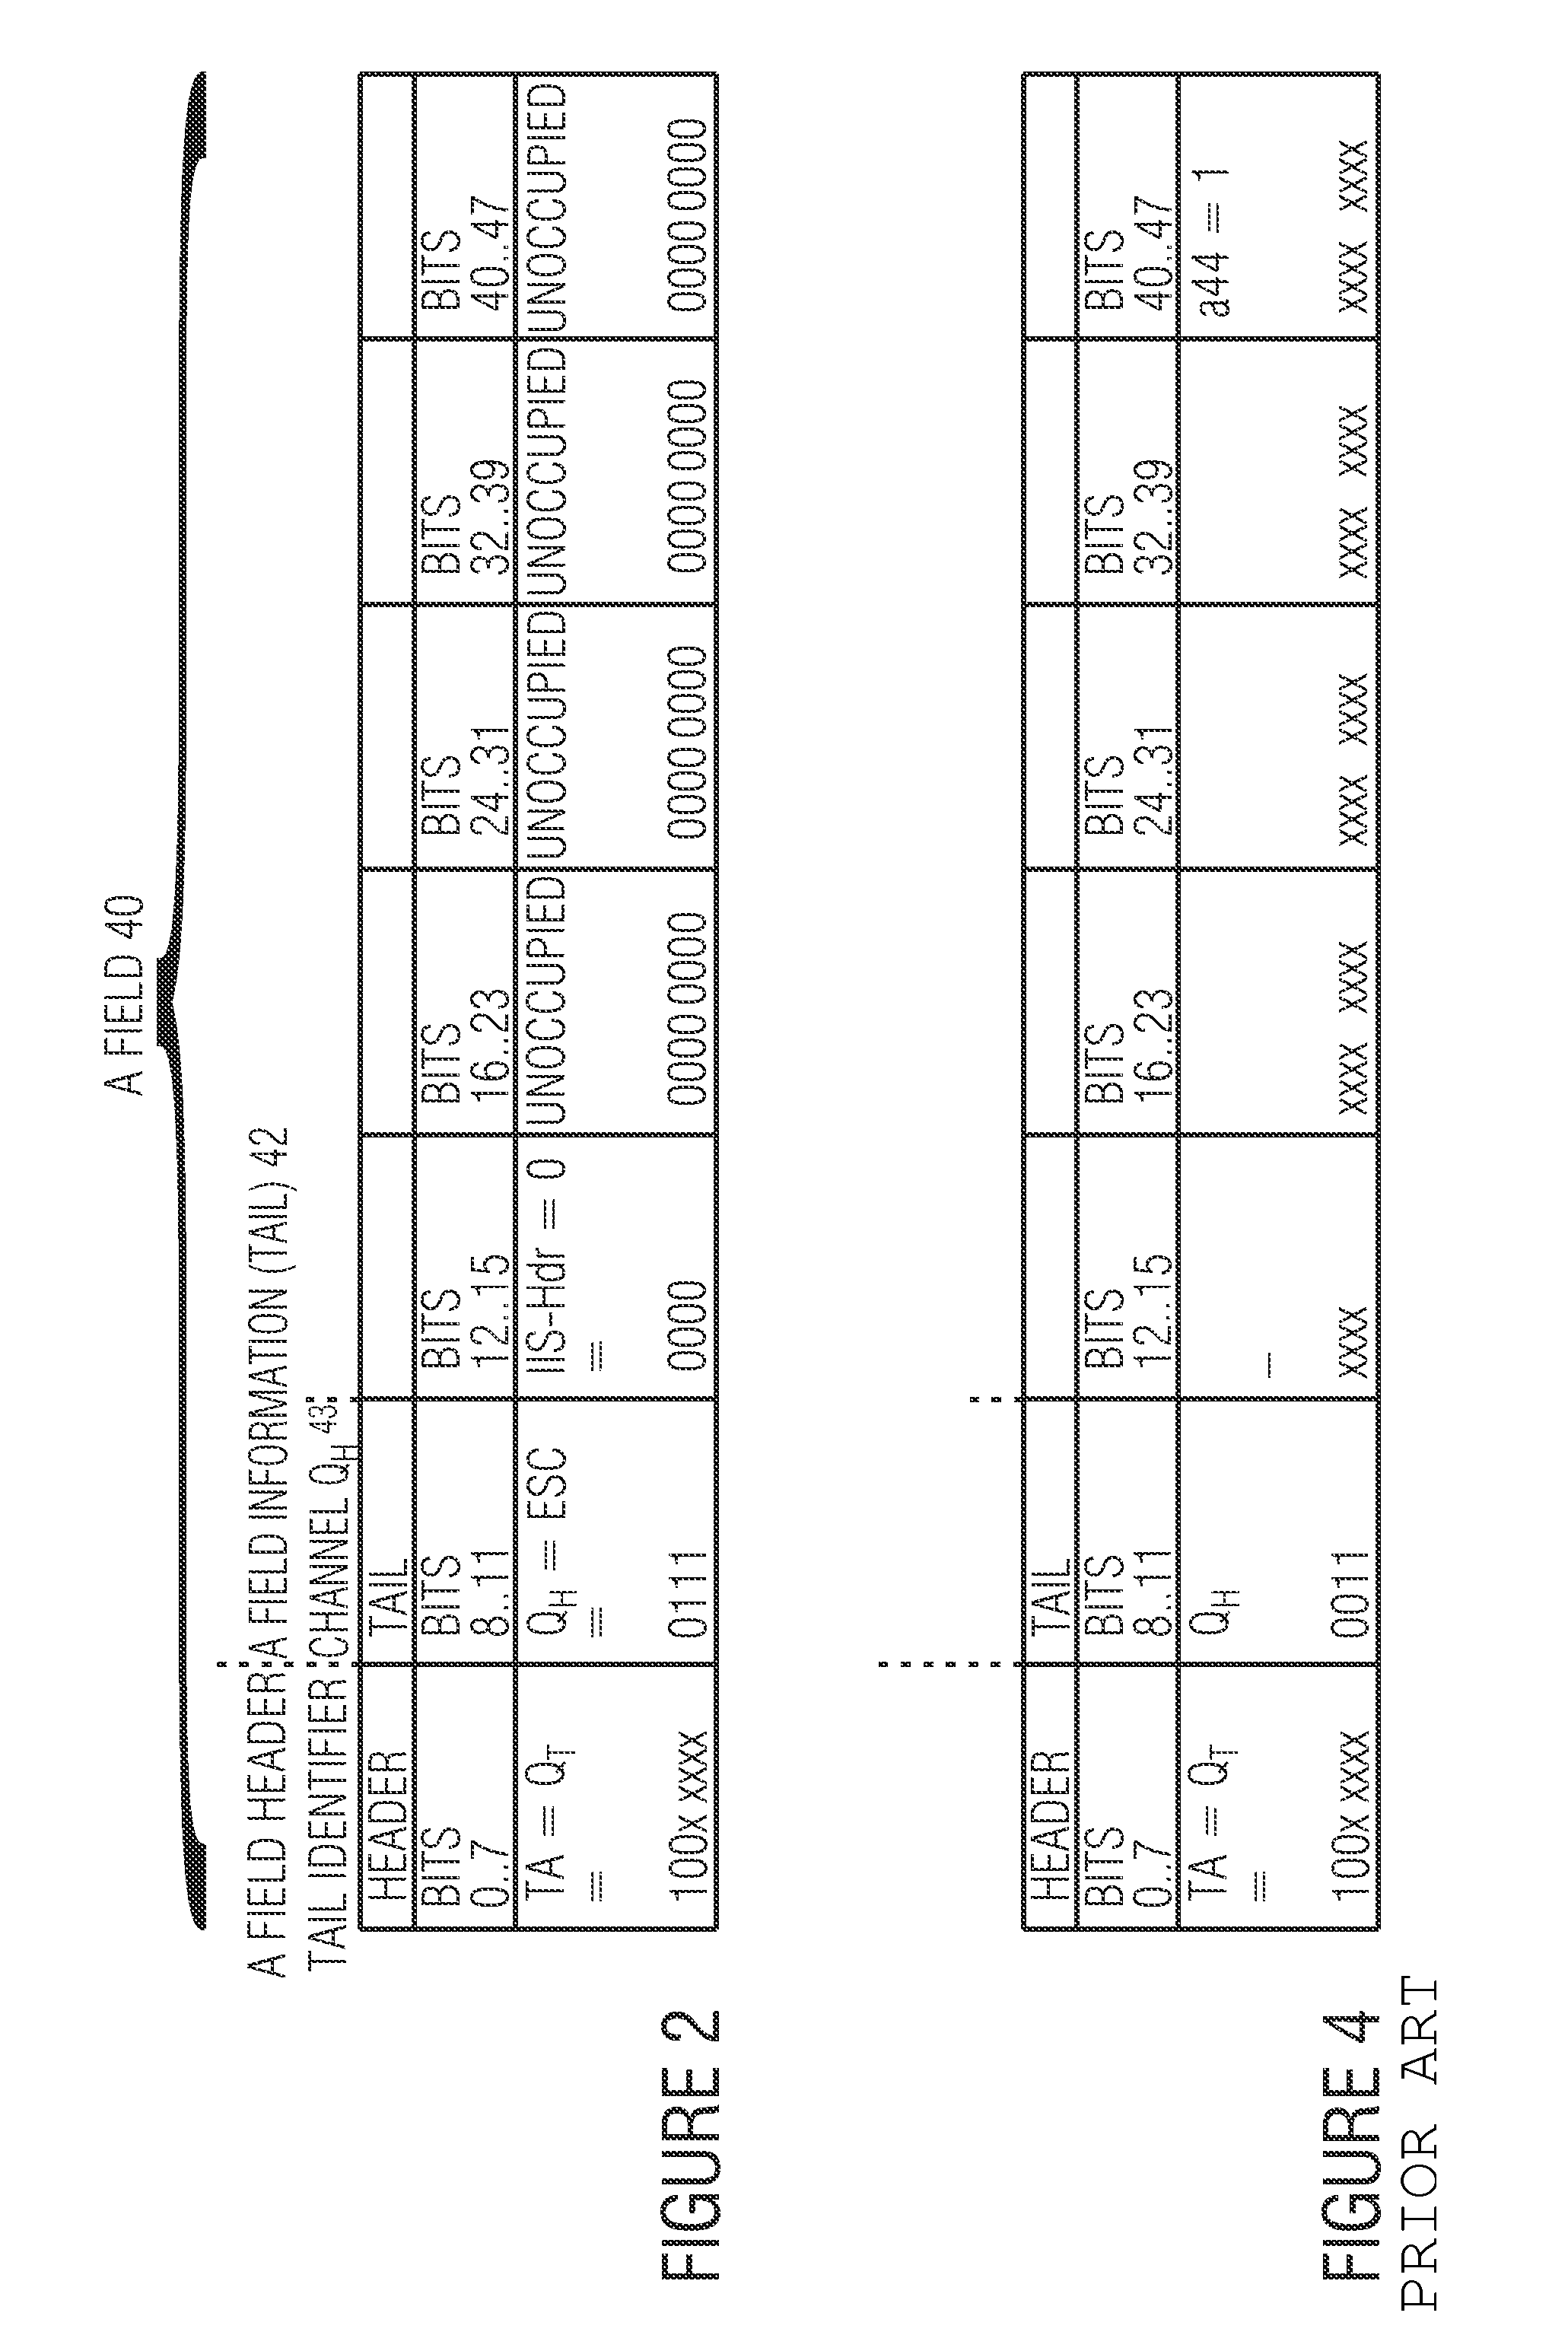 Mobile device and base station for a communication protocol with normal login and temporary login